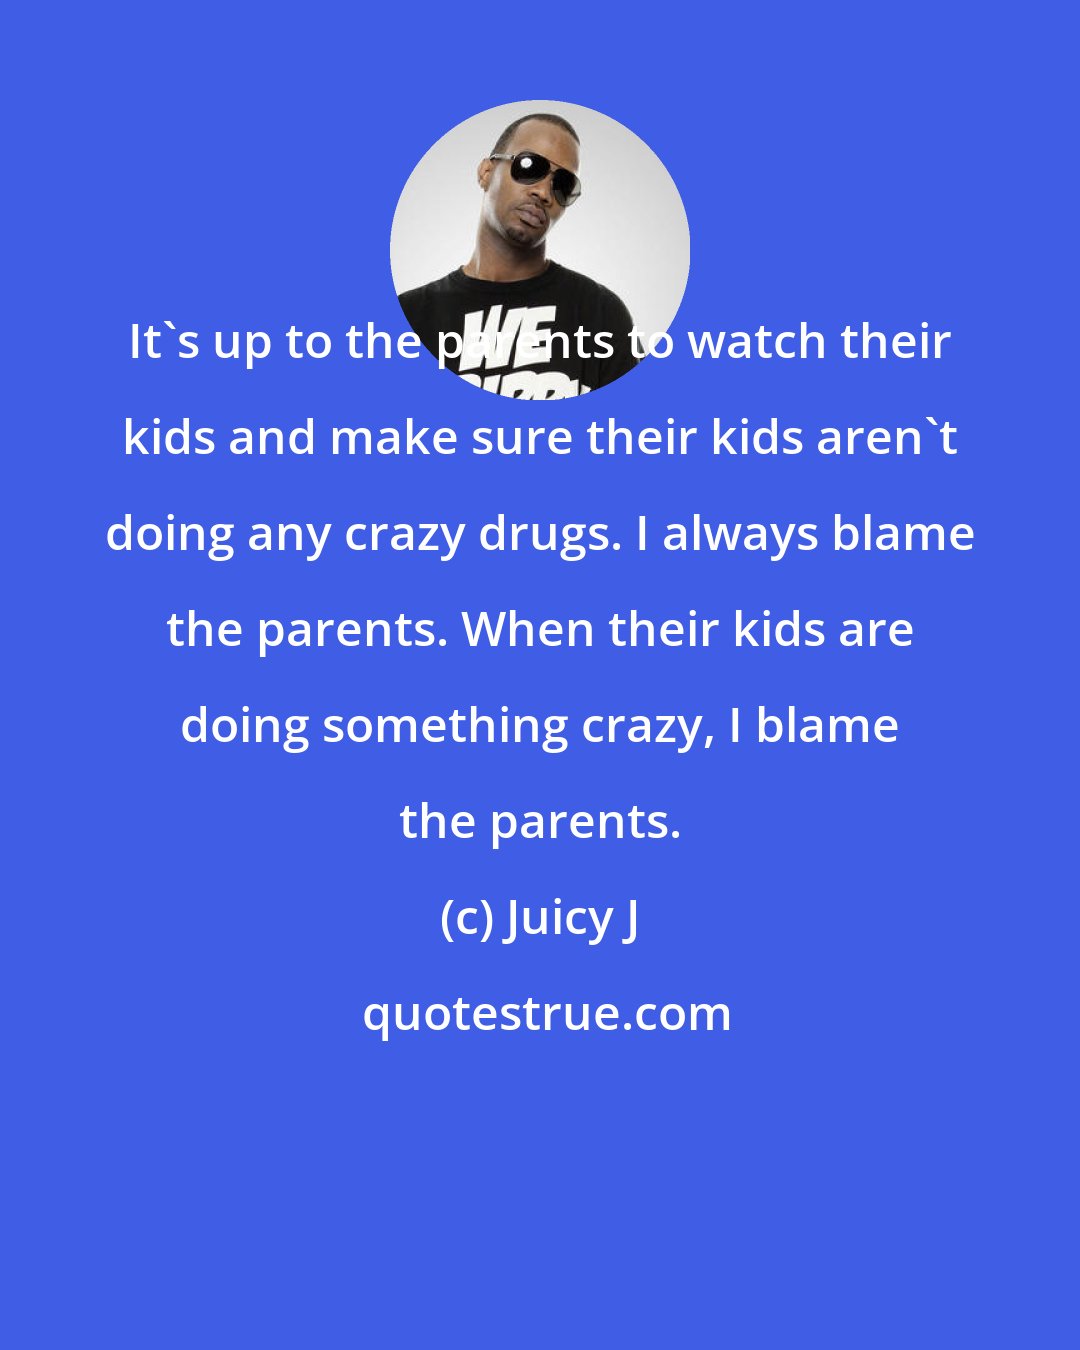 Juicy J: It's up to the parents to watch their kids and make sure their kids aren't doing any crazy drugs. I always blame the parents. When their kids are doing something crazy, I blame the parents.